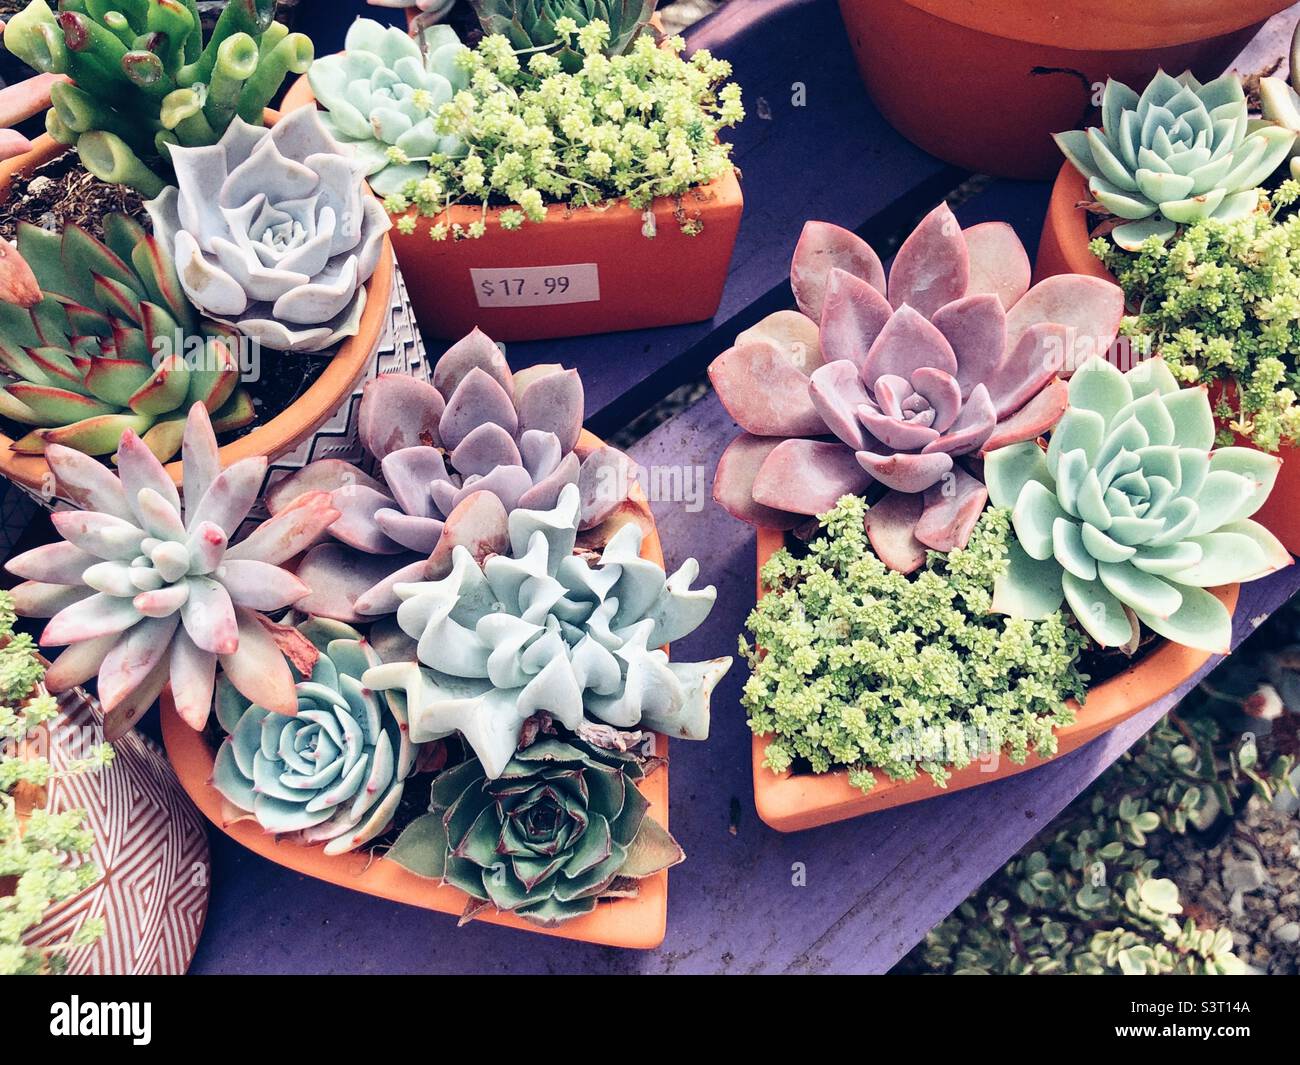 Succulents in heart shaped planters at a garden center Stock Photo